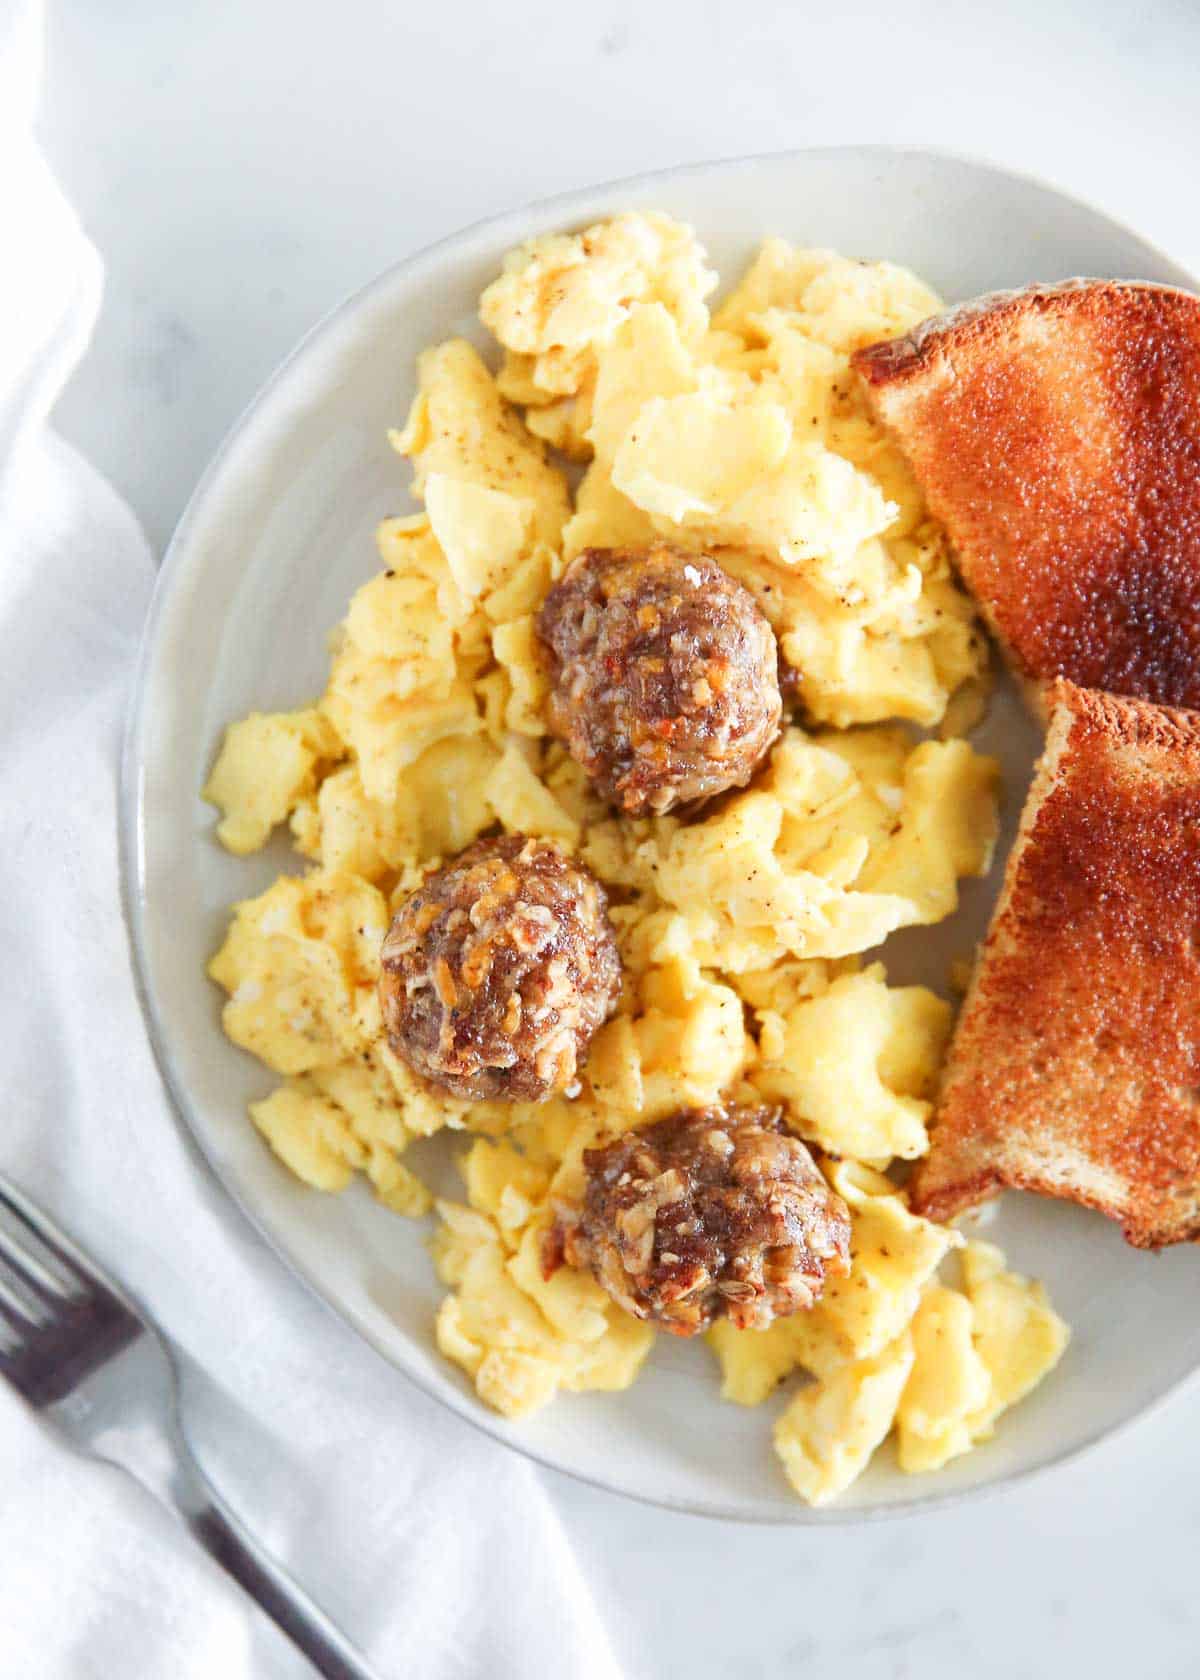 Scrambled eggs on a plate with breakfast meatballs.